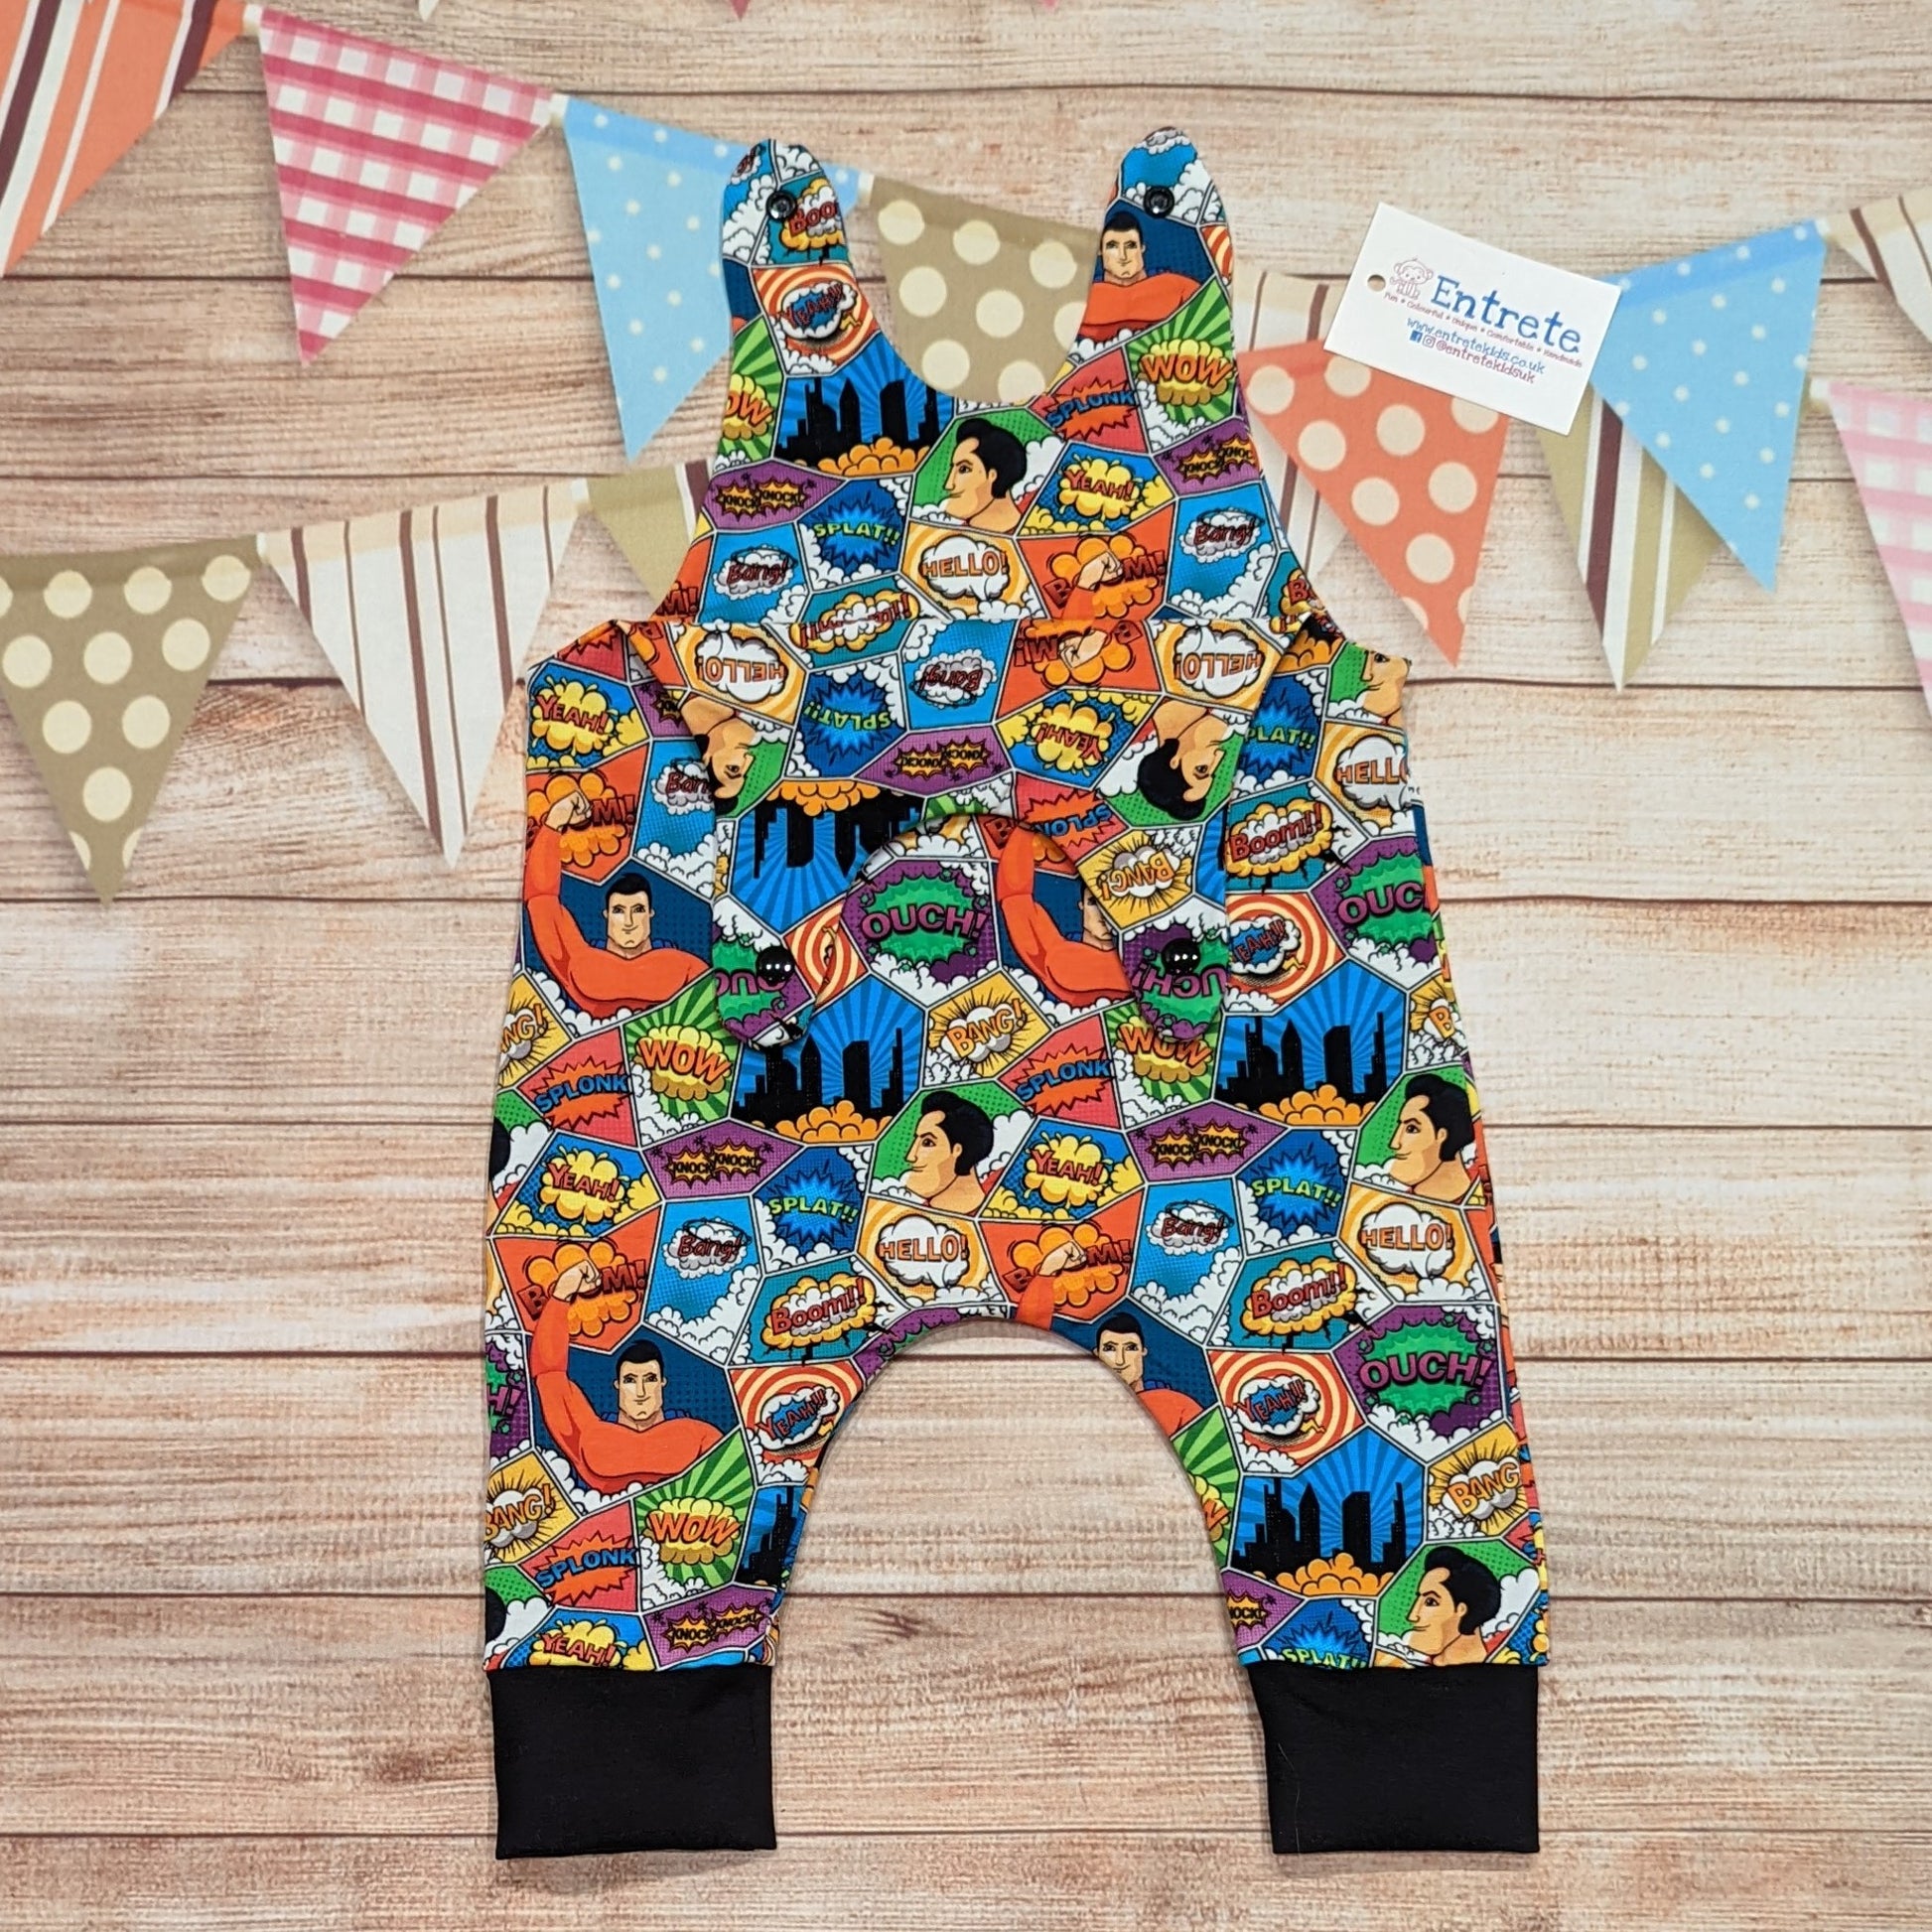 The awesome superhero sleeveless romper with it's comic strip print. Handmade using superhero and black cotton jerseys'. Shown with the shoulder popper entry open.